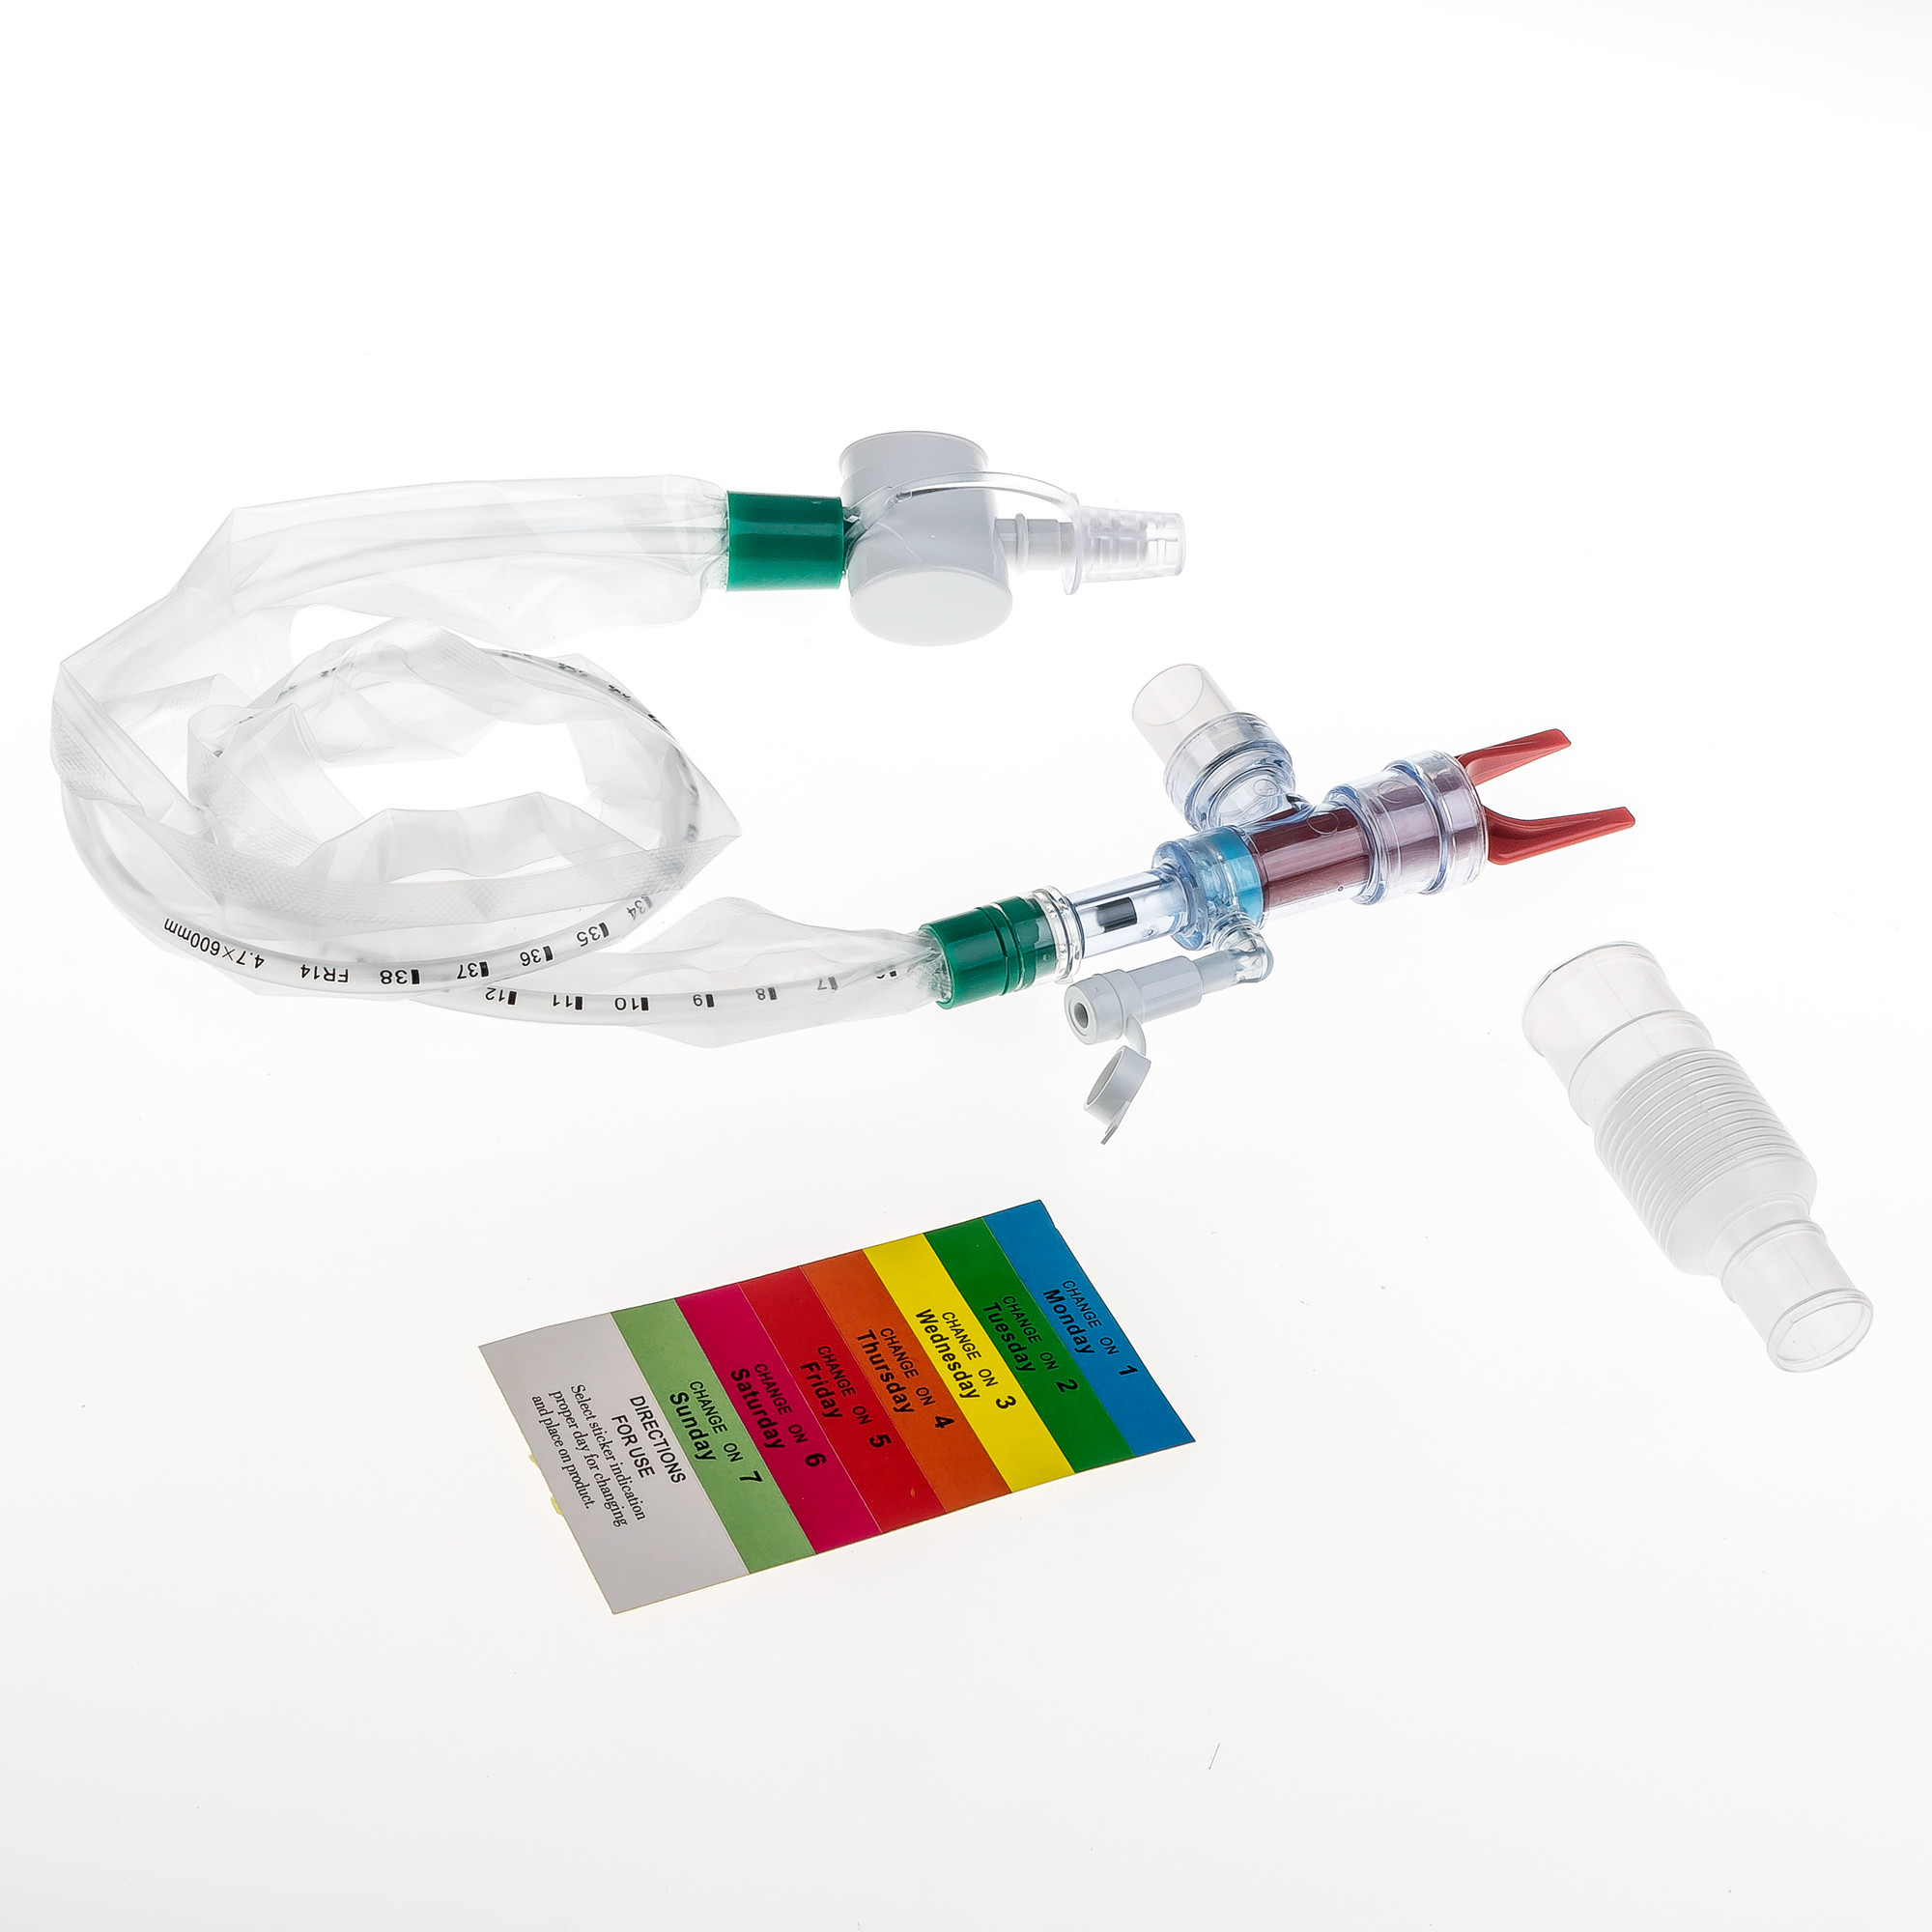  Consumable PVC Endotracheal Closed System Suction Catheter 14Fr Manufactures